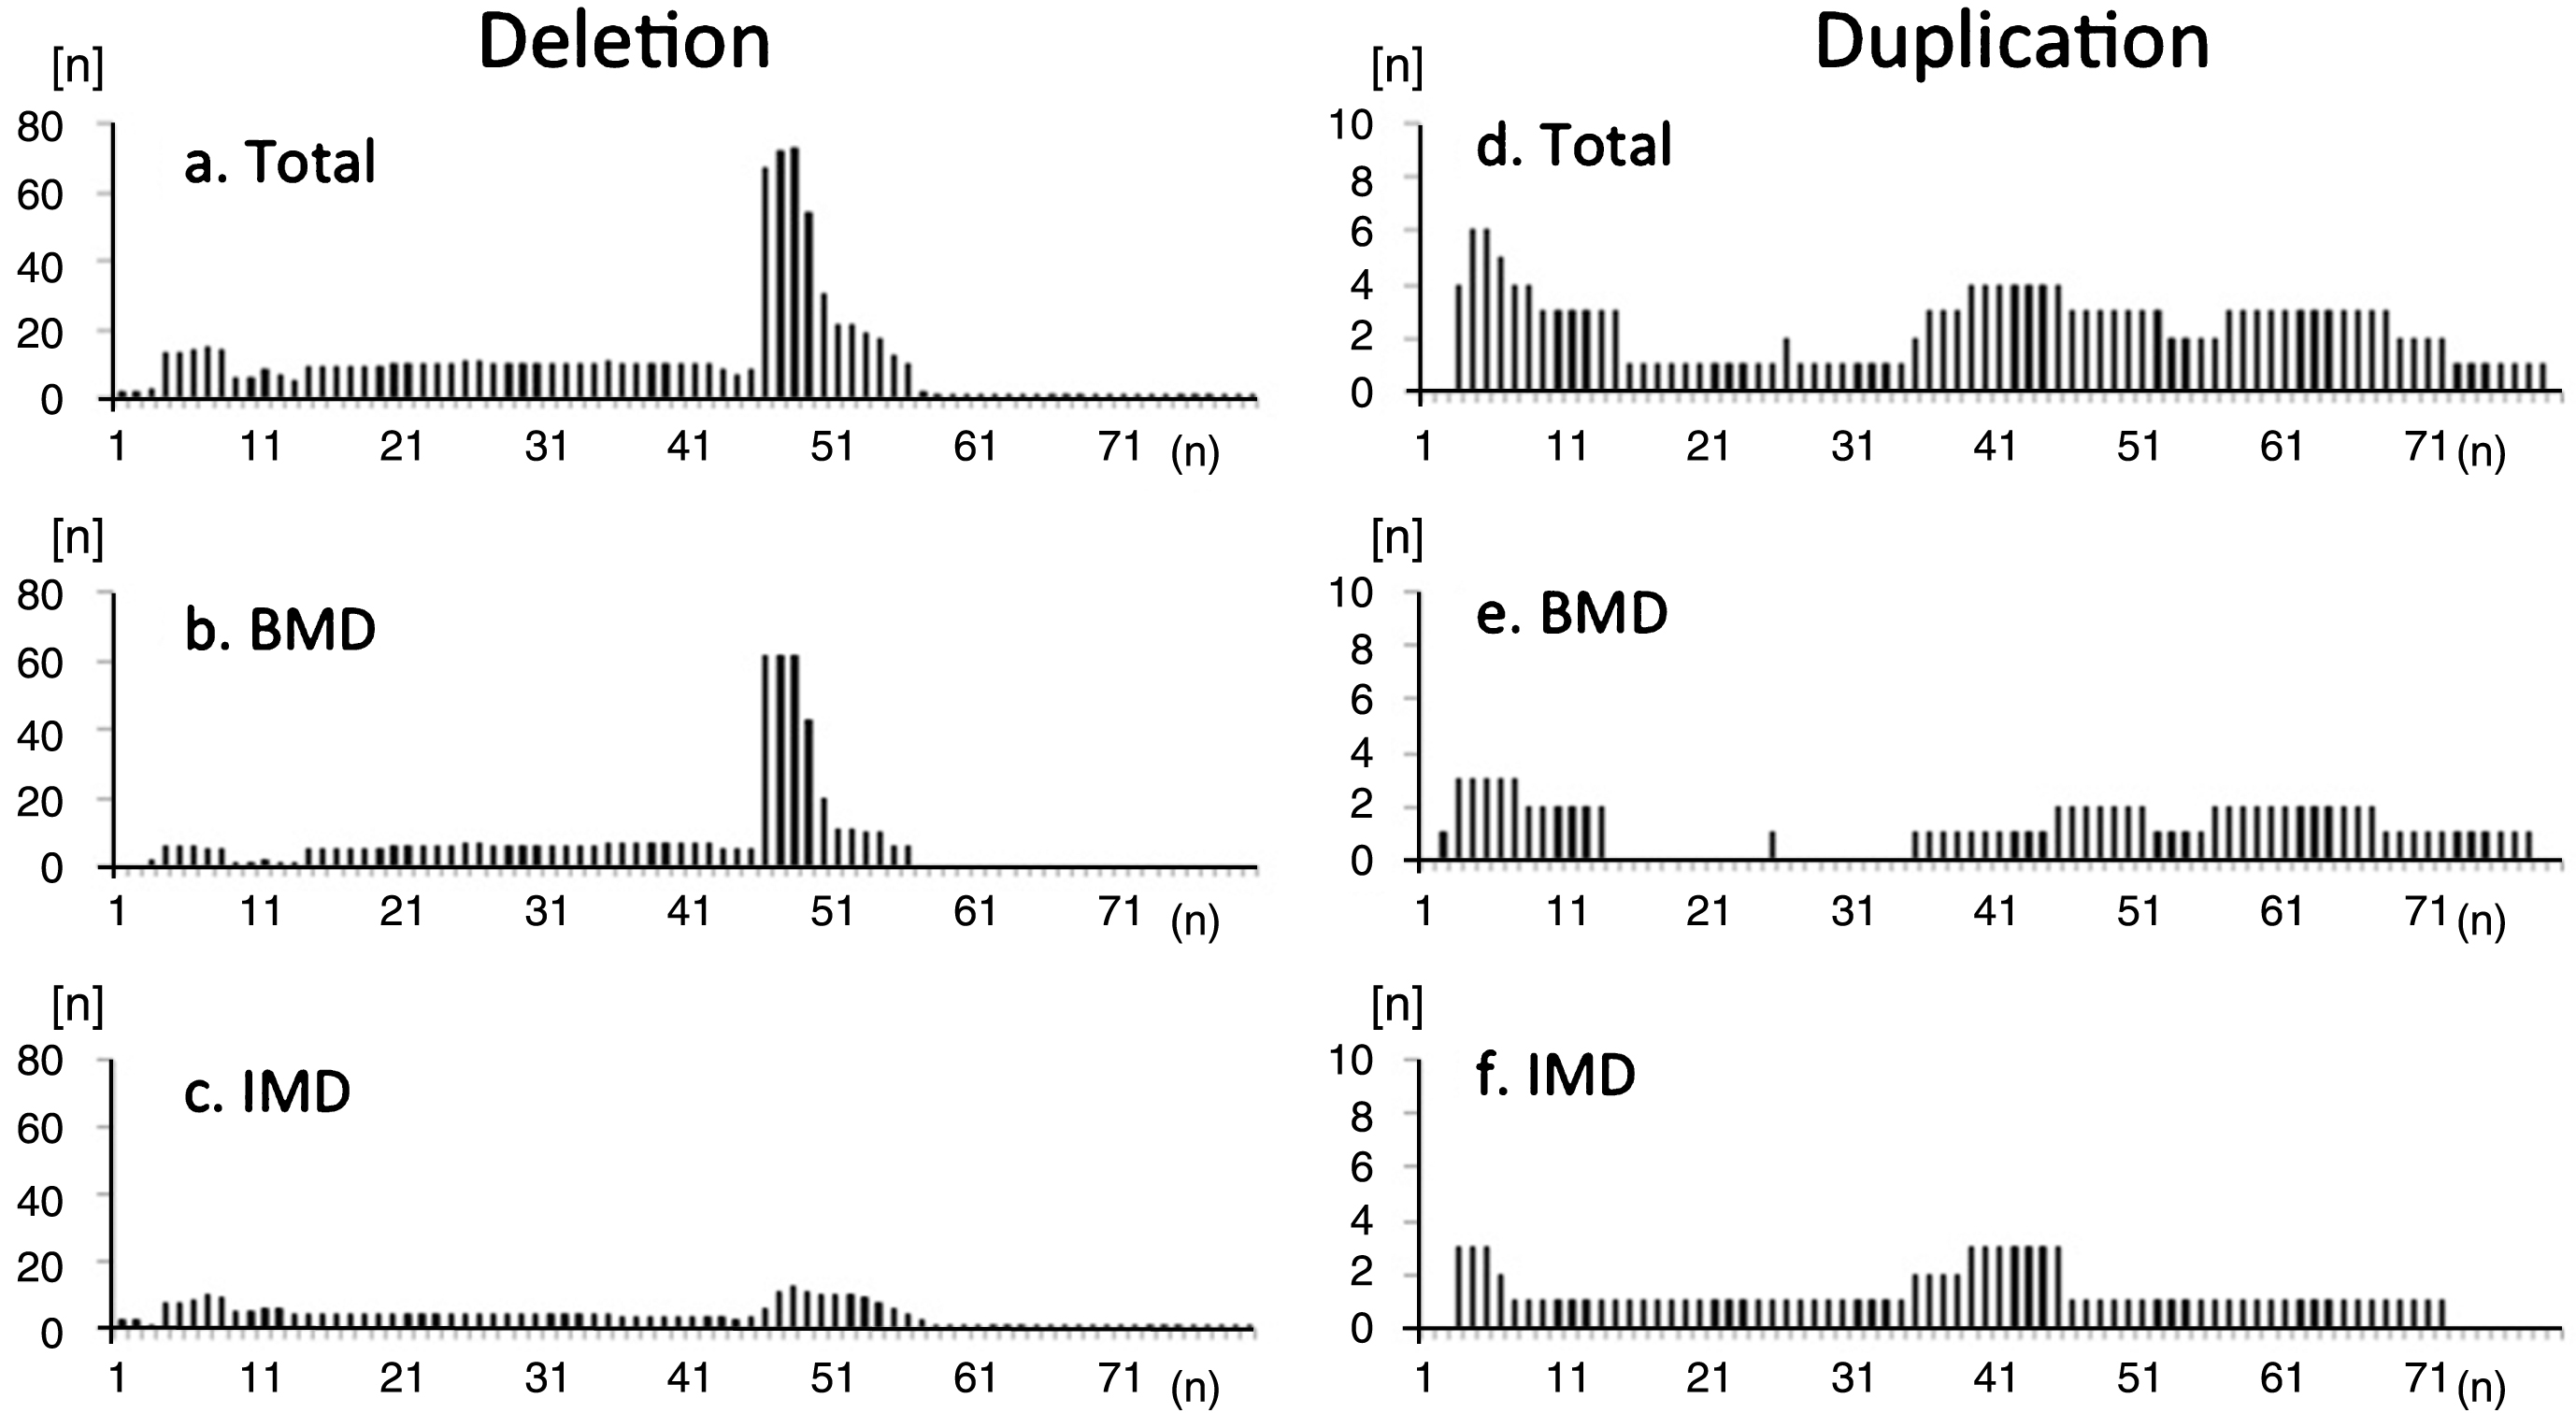 Frequency of deleted exons observed in registrants with (a-c) deletion and (d-f) duplication mutations in the total study population (a, d), participants with BMD (b, e), and participants with IMD (c, f). Distribution of exon deletions shows common hot-spot regions in exons 45–54. There were no “hot spots” for duplications. Among IMD participants, hotspot deletion was less frequent compared to BMD participants.